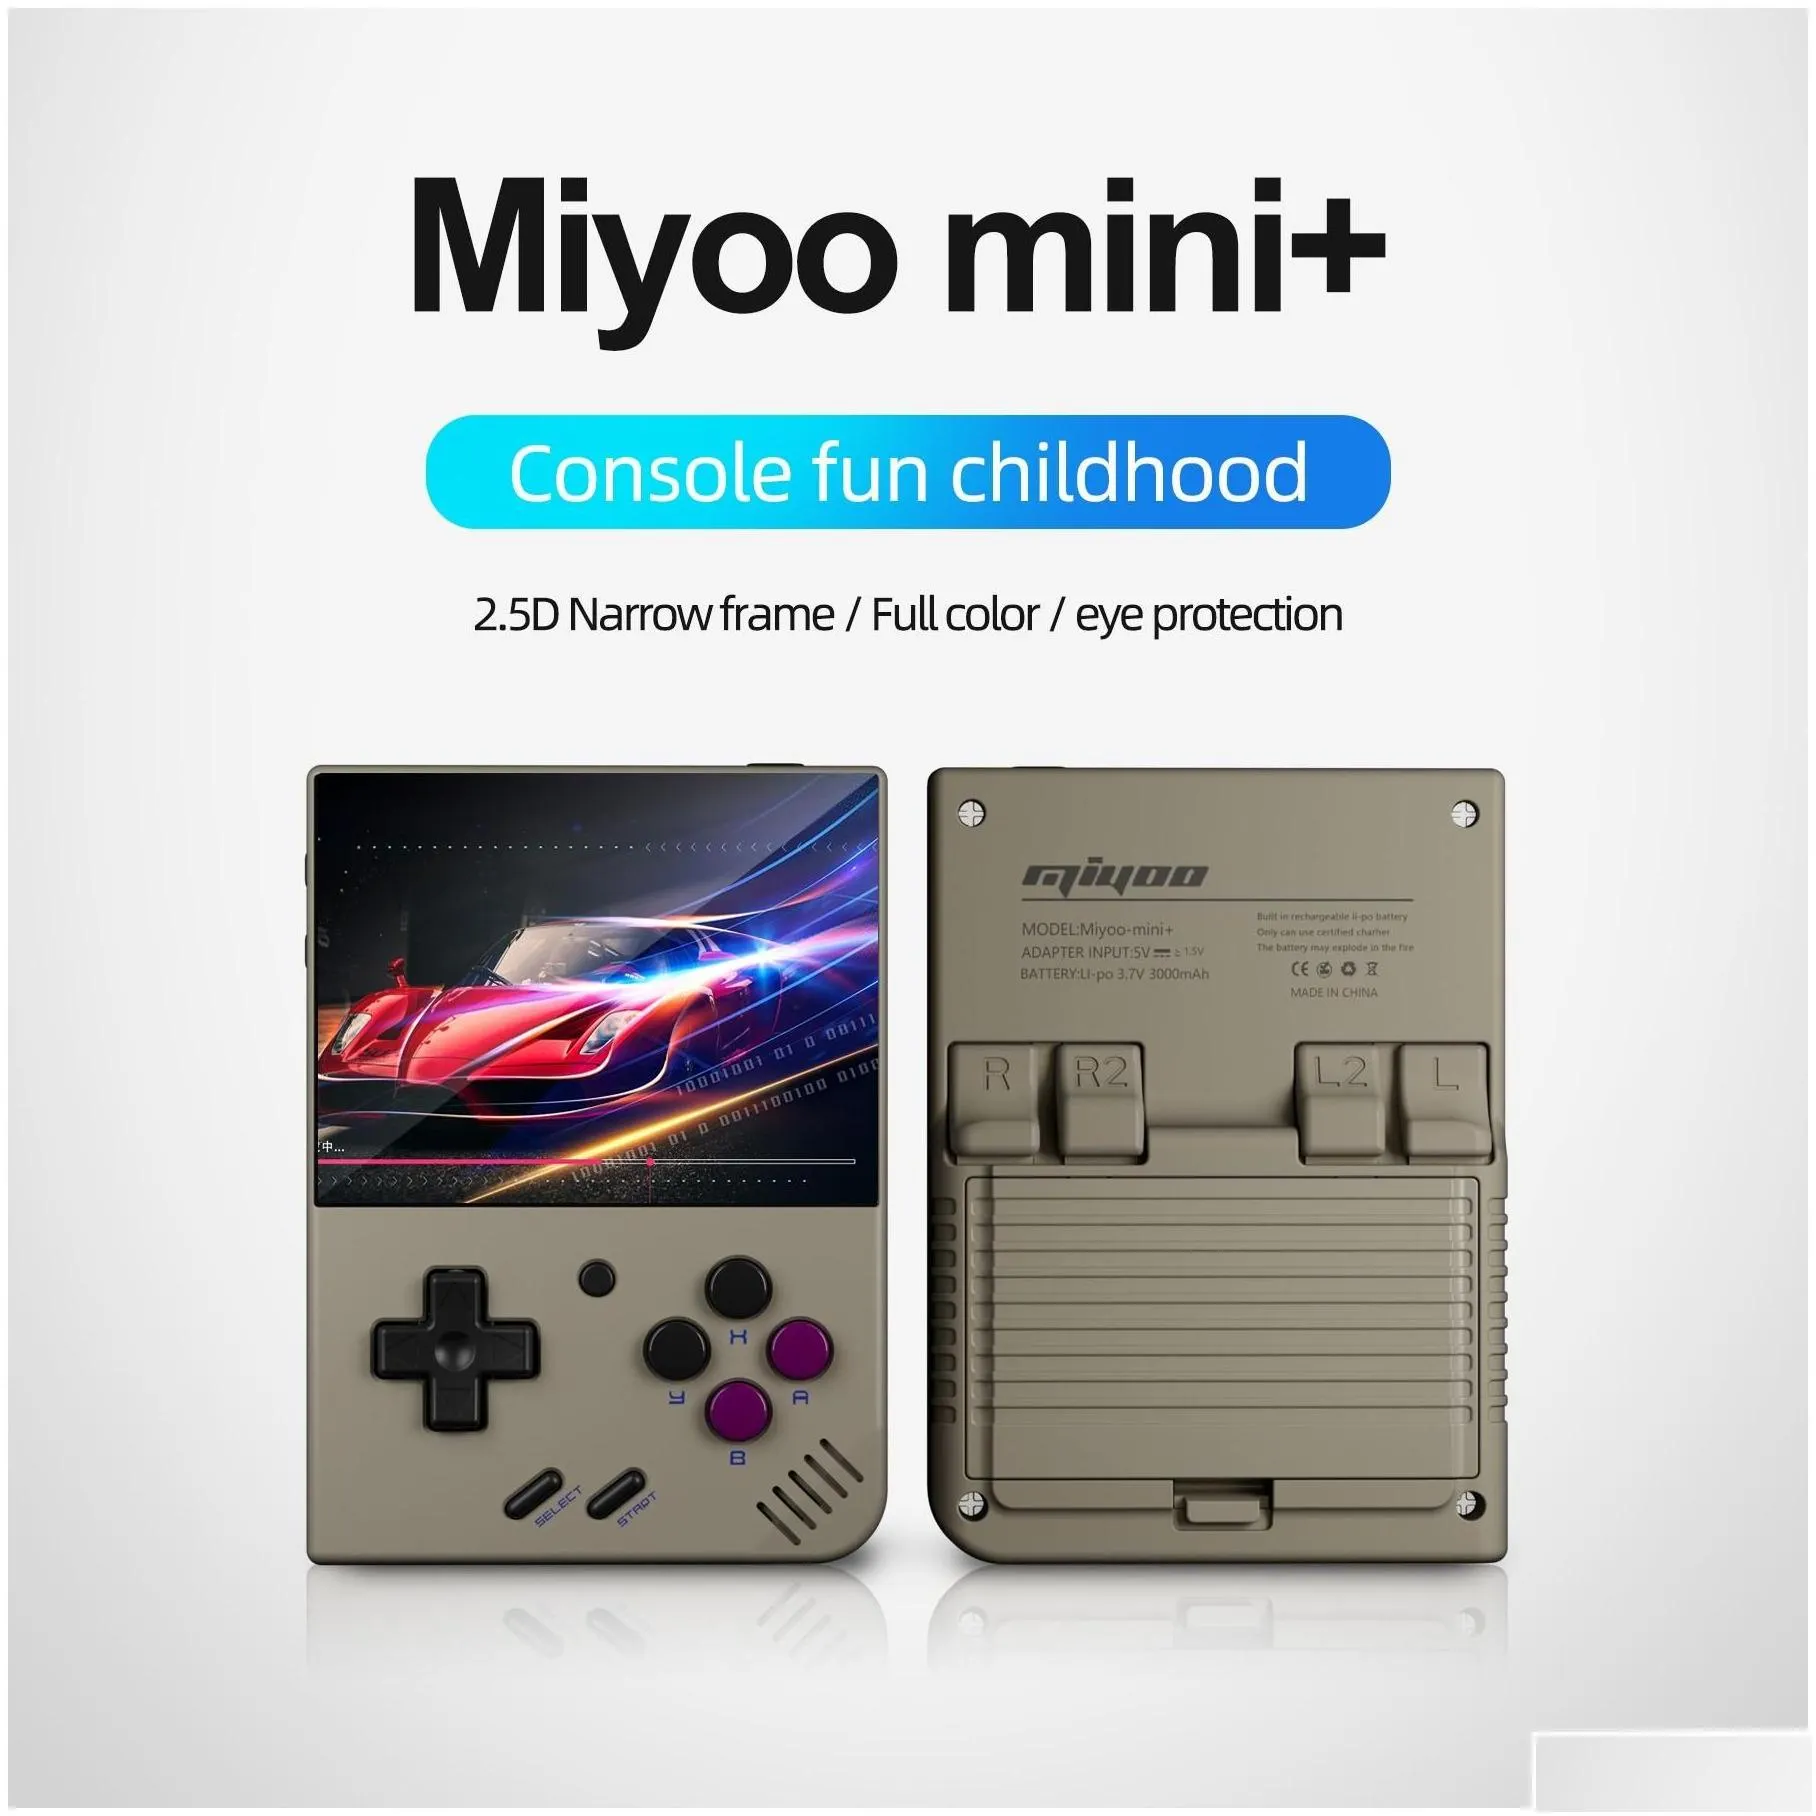 Portable Game Players Miyoo Mini Plus Retro Handheld Video Console Linux System Classic Gaming Emator 3.5 Inch Ips Hd Sn Games V2 Drop